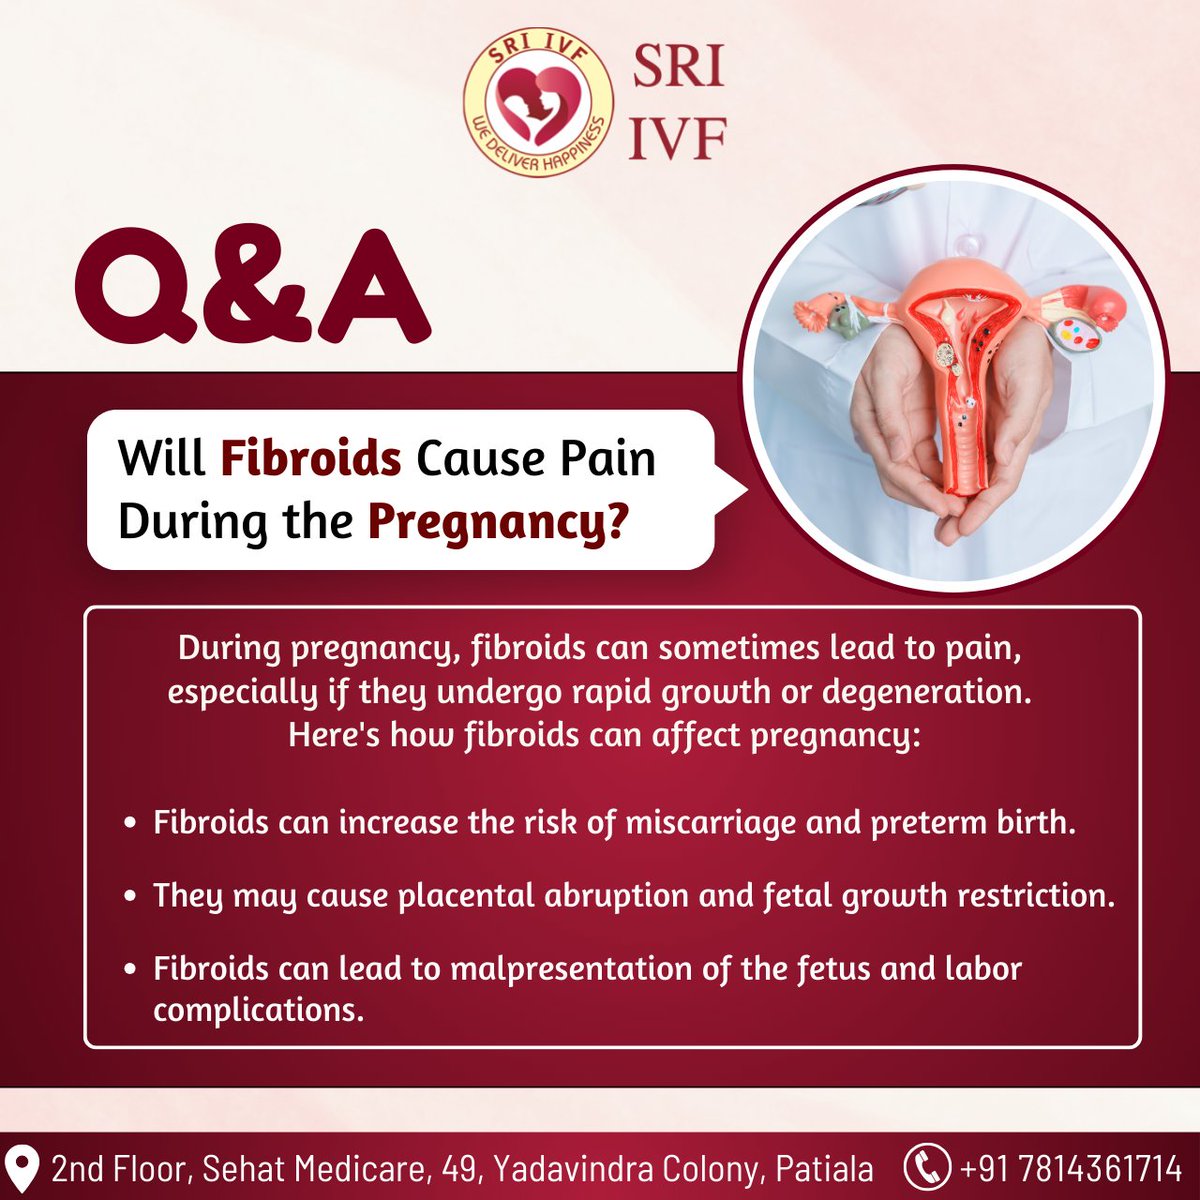 Yes, fibroids can cause pain during pregnancy due to their growth. They can also increase the risk of miscarriage, preterm birth, and placental issues. #FibroidsAndPregnancy #Fibroids #FibroidsTreatment #FertilityClinic #FertilityExperts #sriivf #patiala #punjab #sriivfpataila